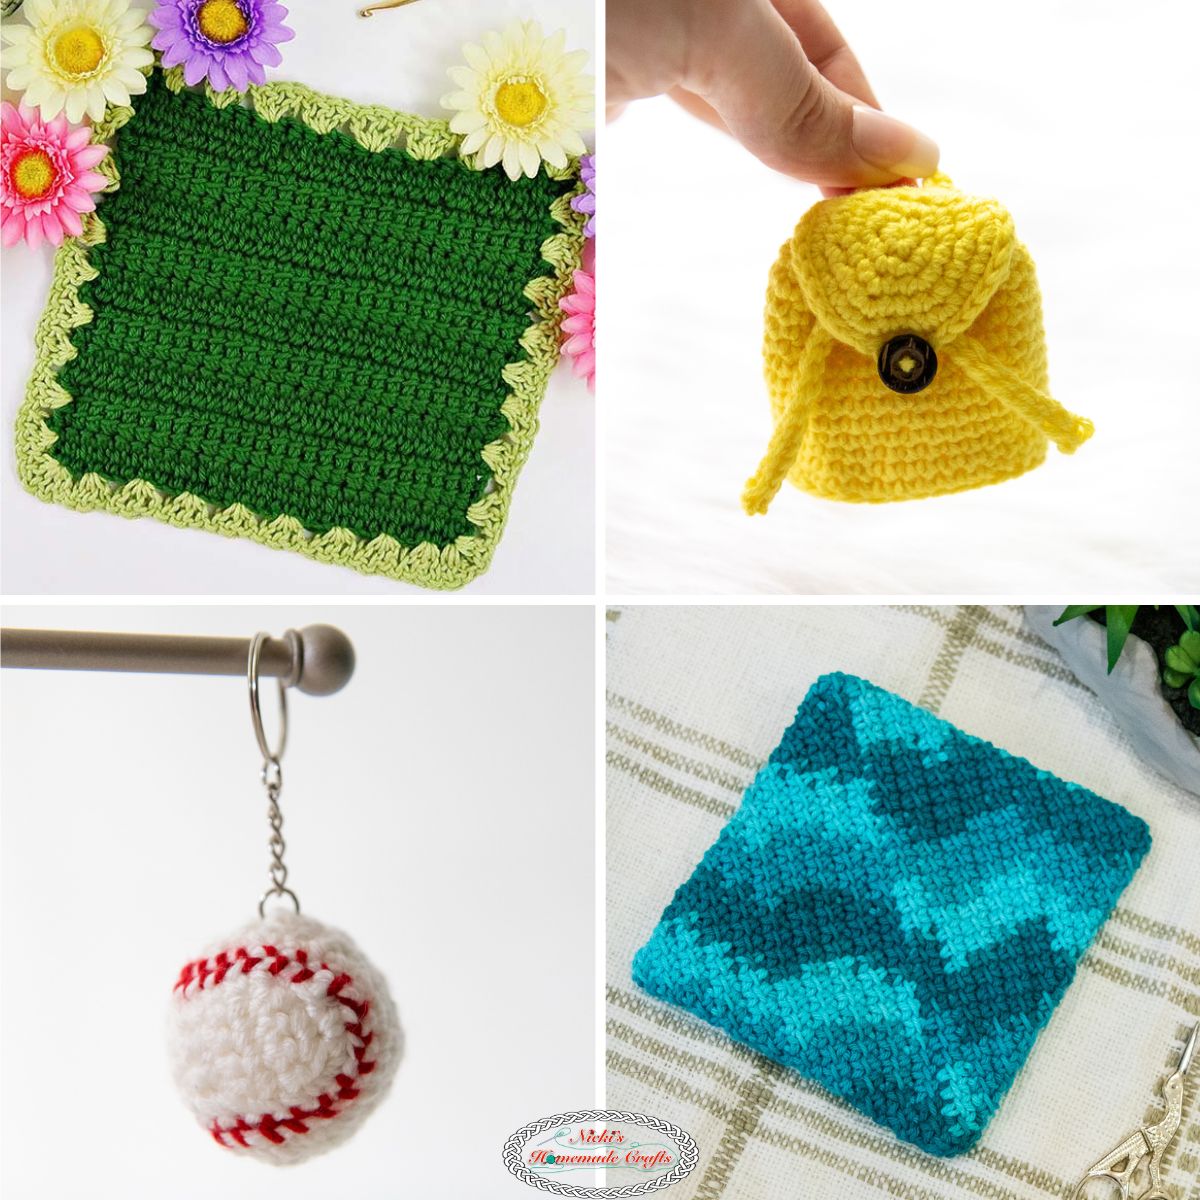 Crochet For Beginners: The Easiest & Practices Beginners Guide that will  Explain to You How to Start with Crochet even if You Have Never Touched a